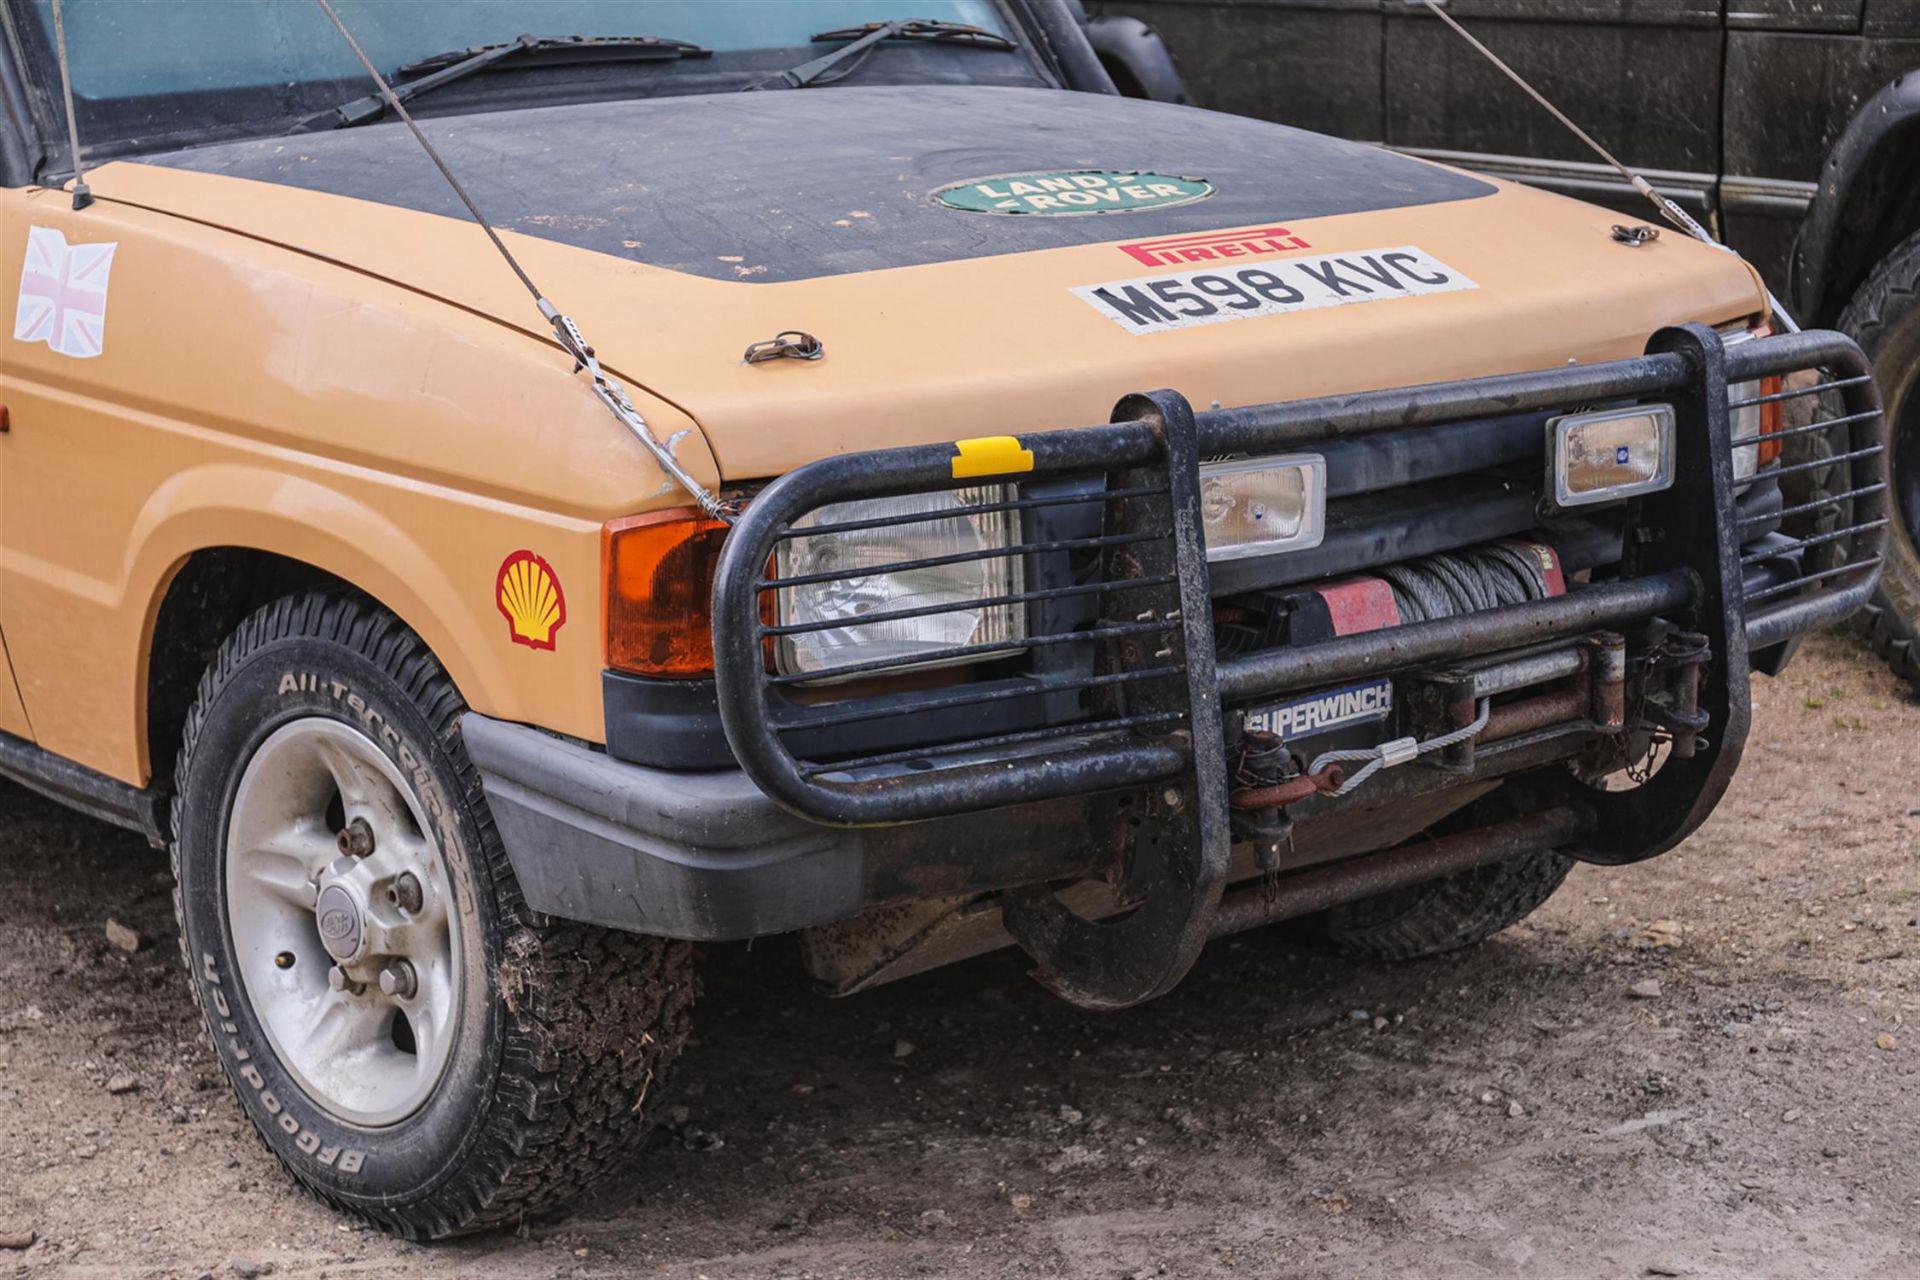 1995 Land Rover Discovery Camel Trophy - Project - Image 5 of 10